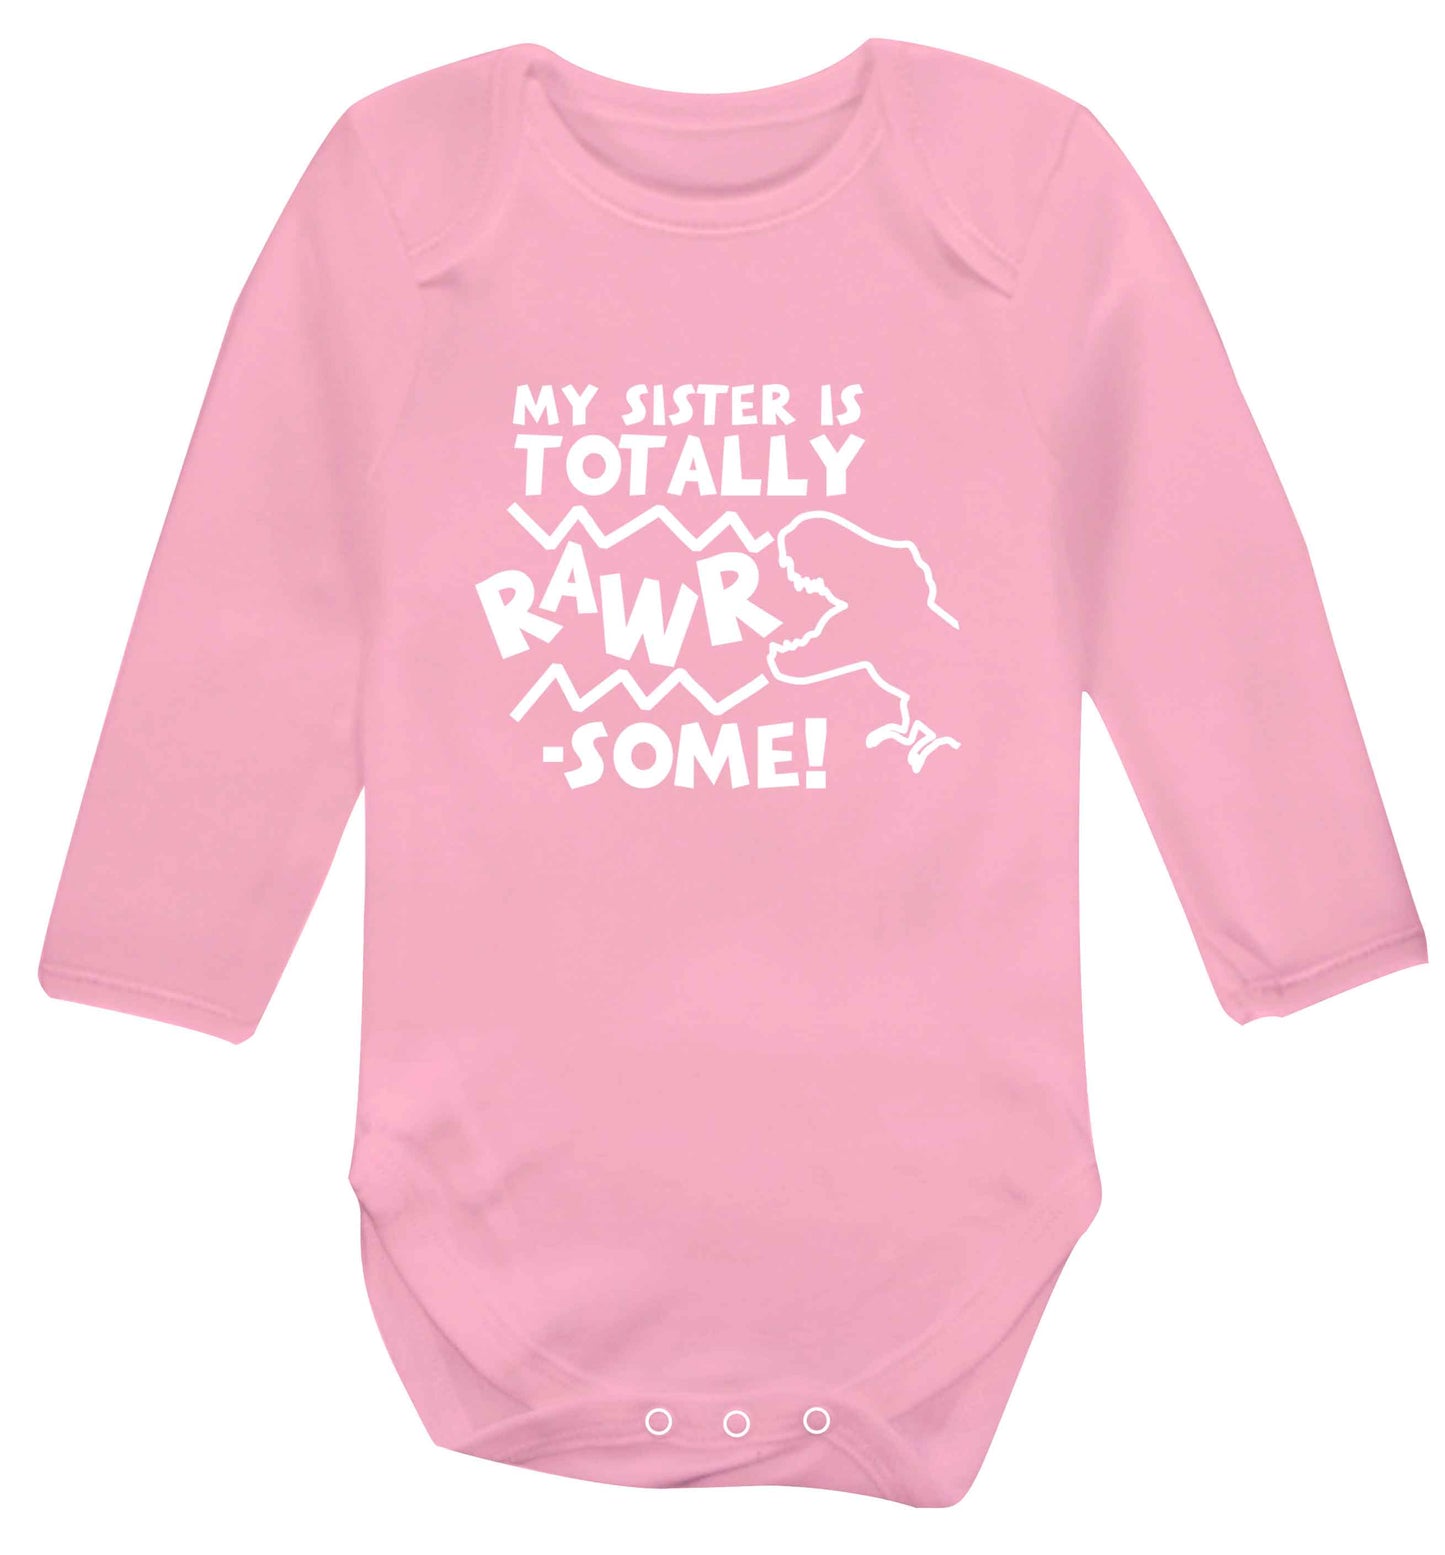 My sister is totally rawrsome baby vest long sleeved pale pink 6-12 months